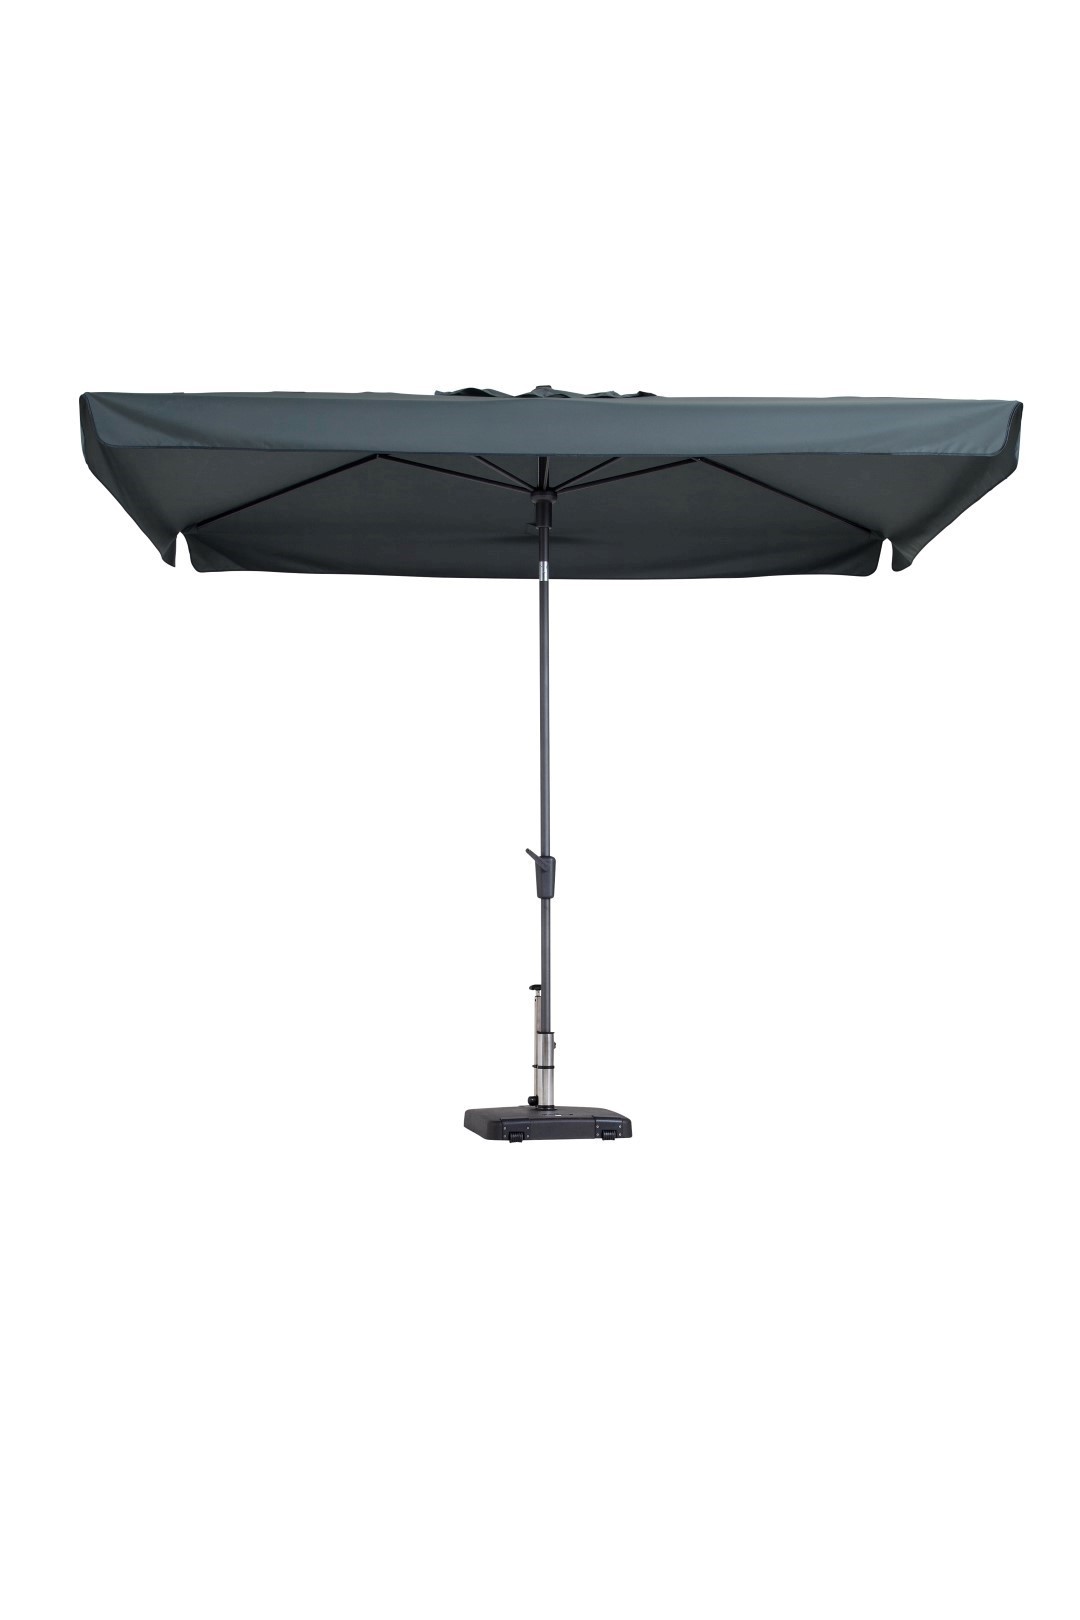 https://www.warentuin.nl/media/catalog/product/S/C/SCAN8713229247591_madison_parasol_delos_luxe_200x300_cm_polyester_grey_madison_4bf7.jpg